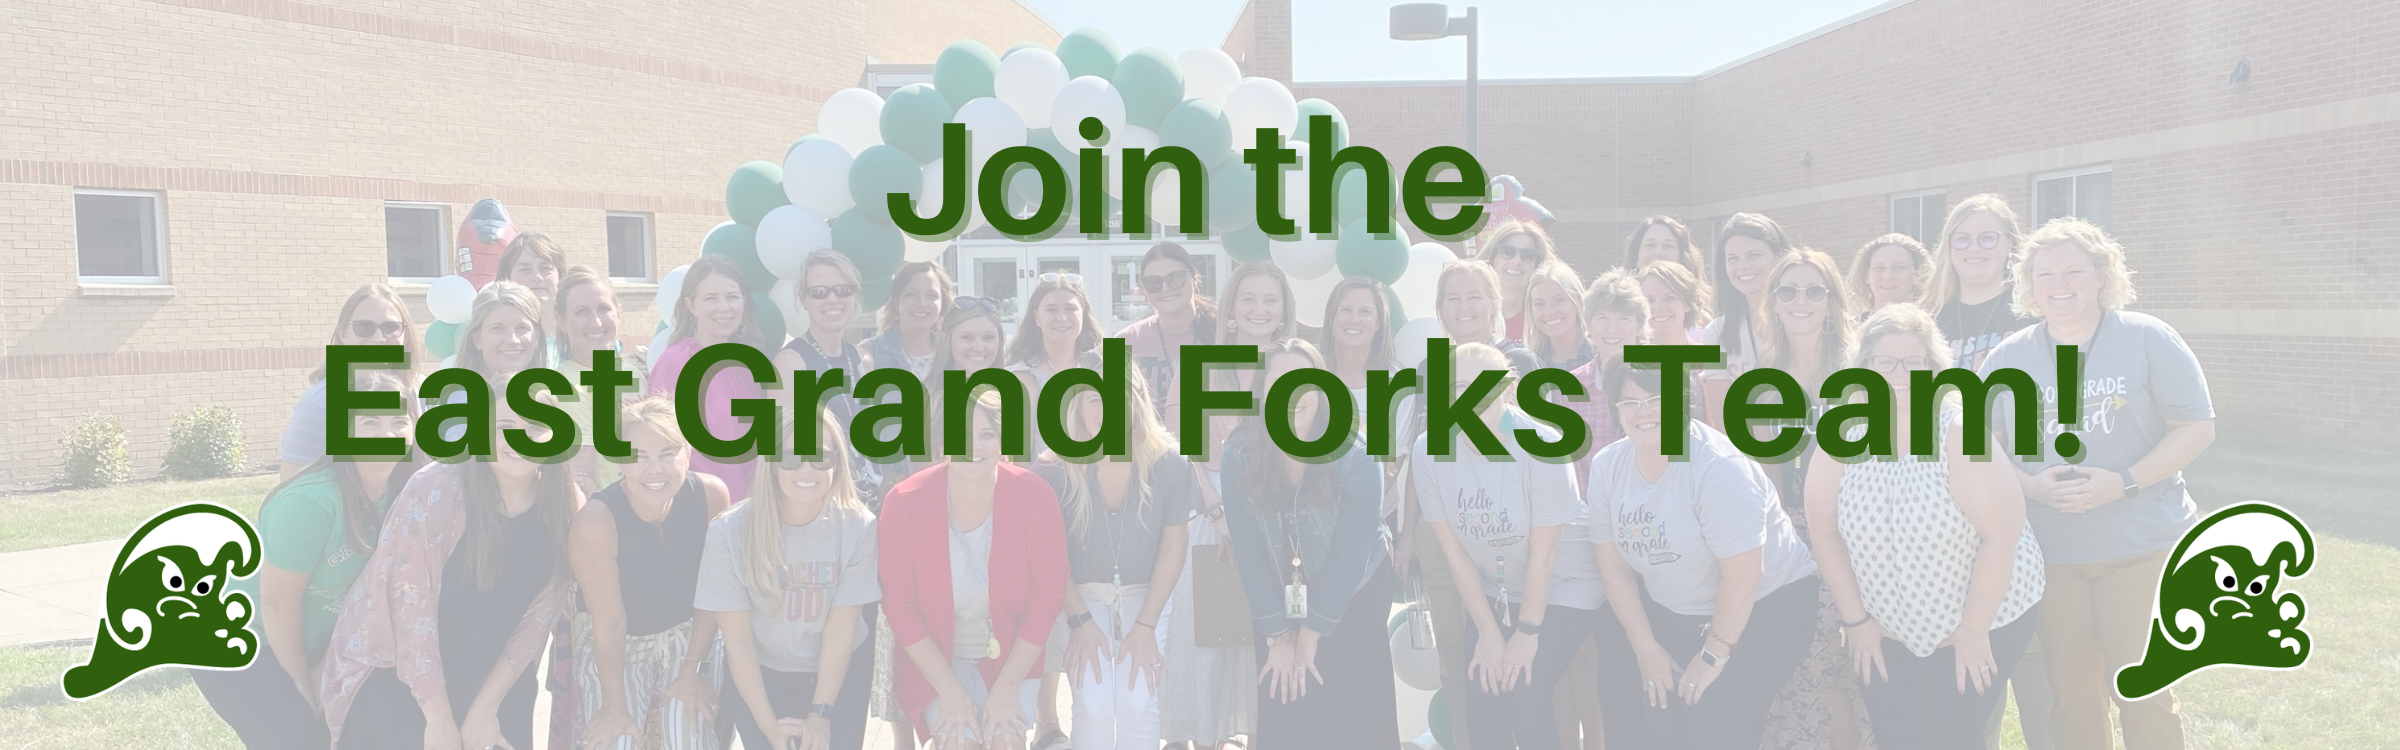 Join the East Grand Forks Team! 